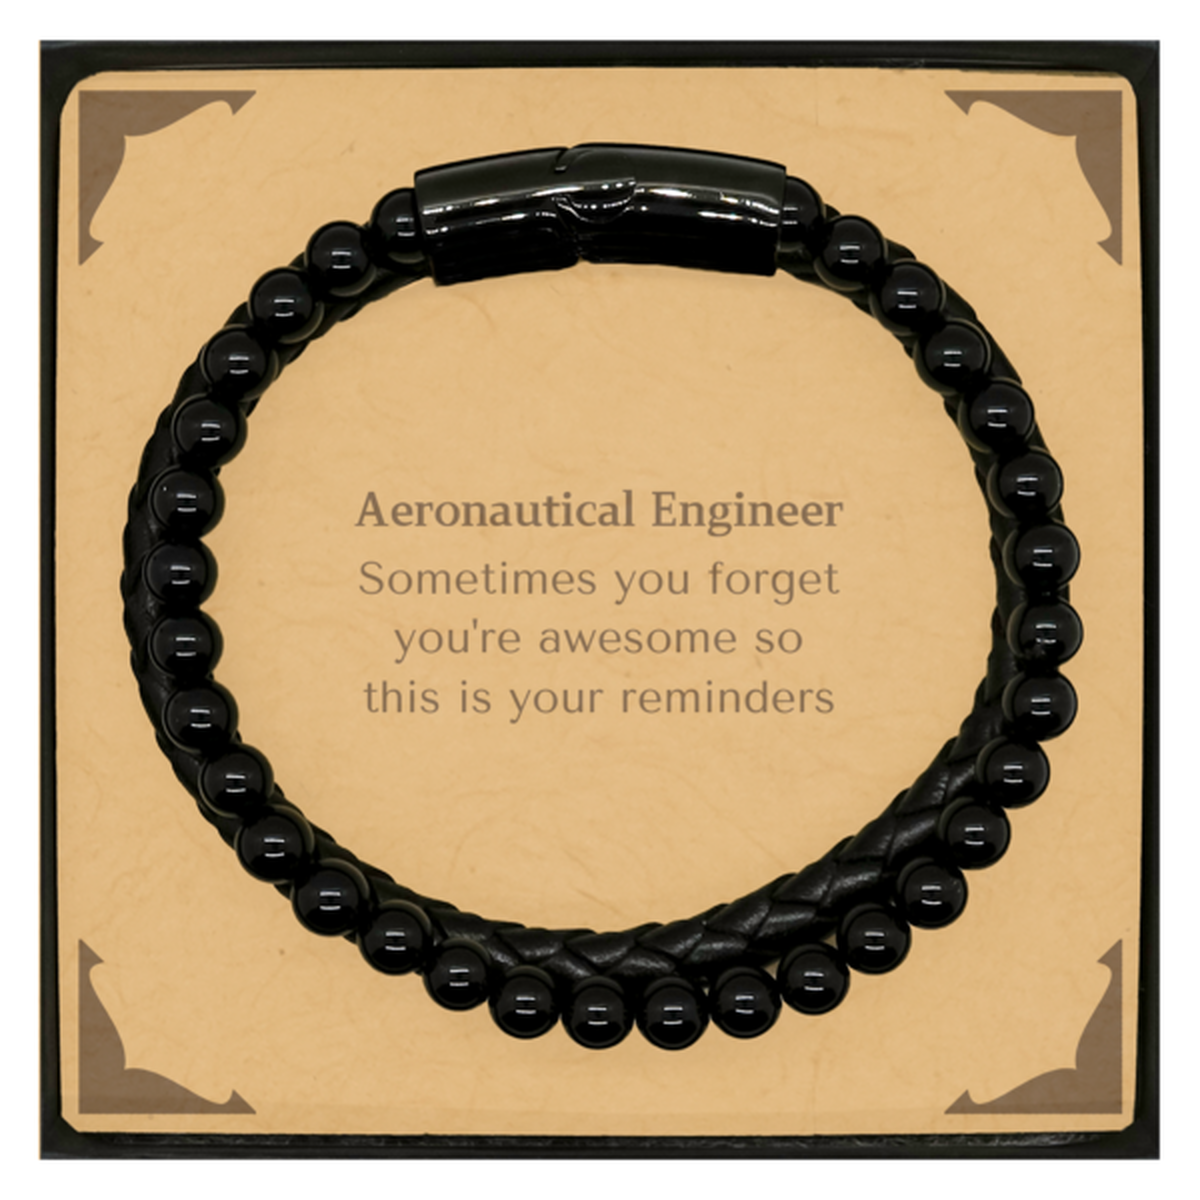 Sentimental Aeronautical Engineer Stone Leather Bracelets, Aeronautical Engineer Sometimes you forget you're awesome so this is your reminders, Graduation Christmas Birthday Gifts for Aeronautical Engineer, Men, Women, Coworkers